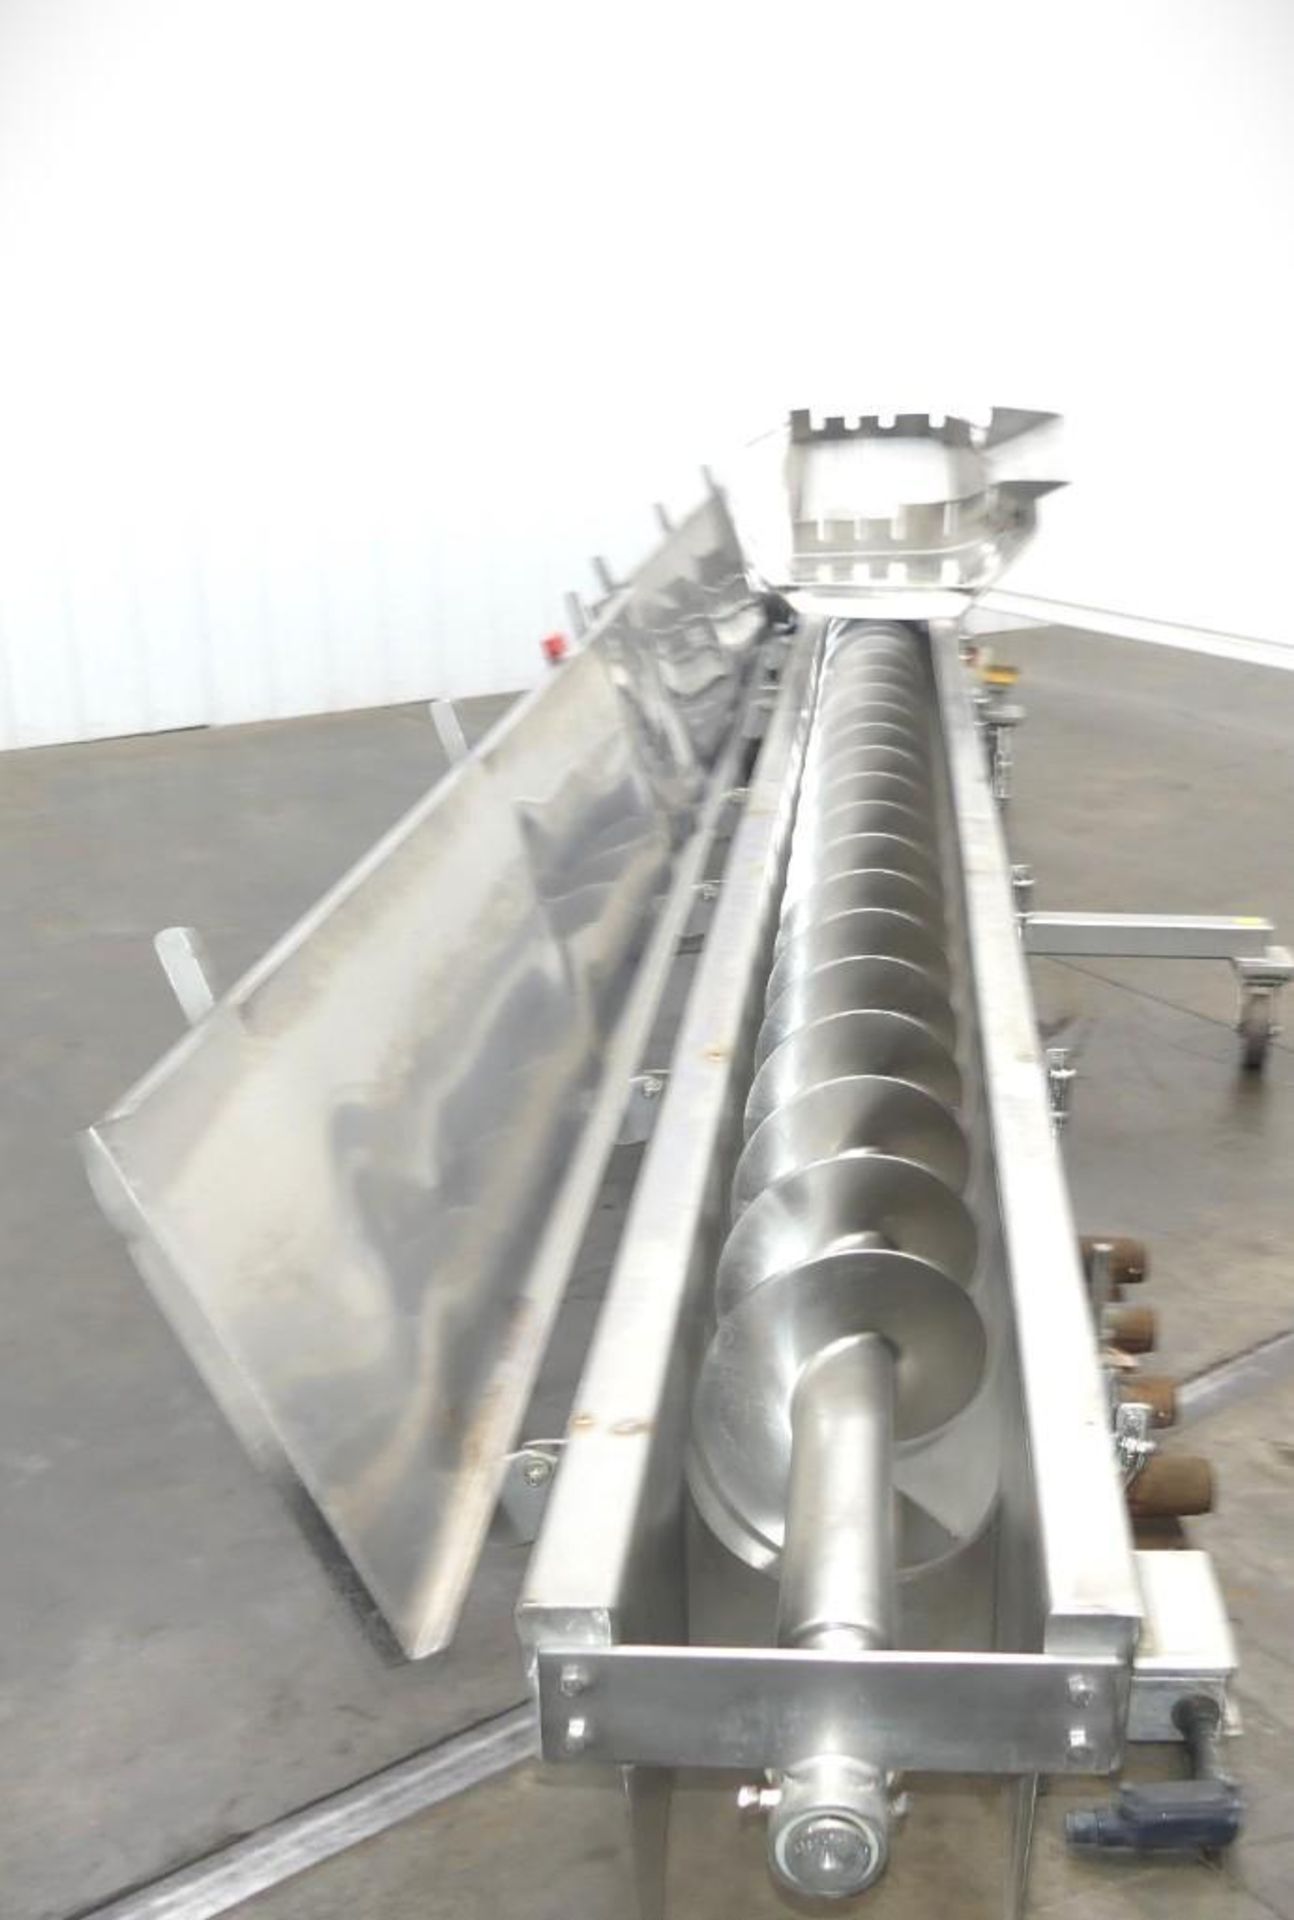 SS Trough Auger Conveyer 217"Long x 70" Wide - Image 8 of 15